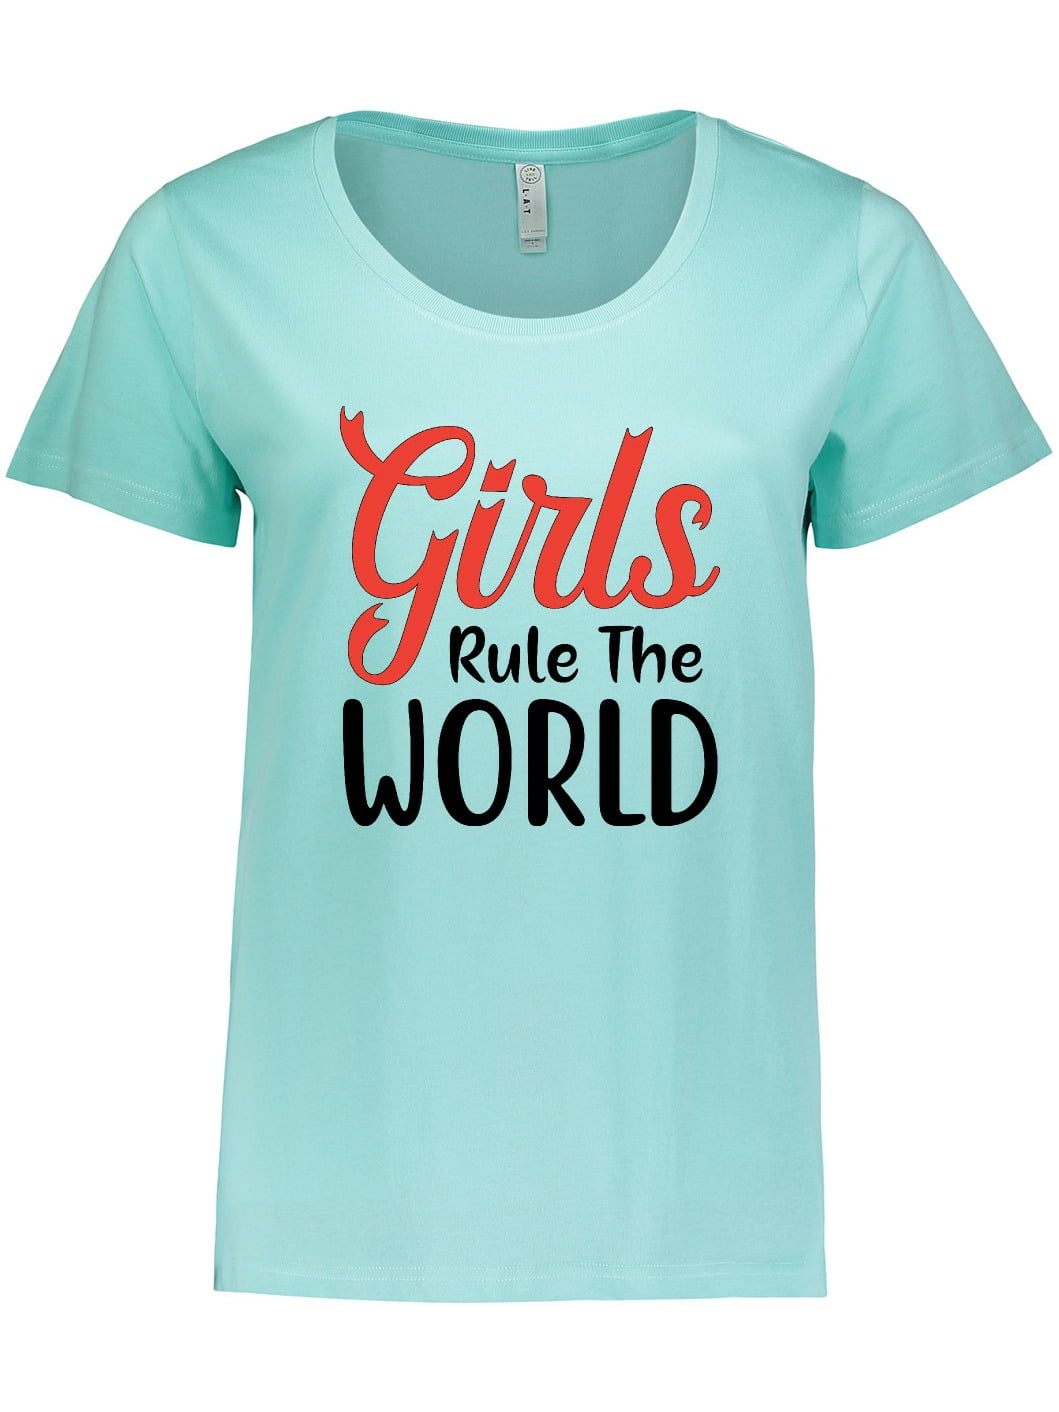 Take That/Rule The World Ladies T-shirt 